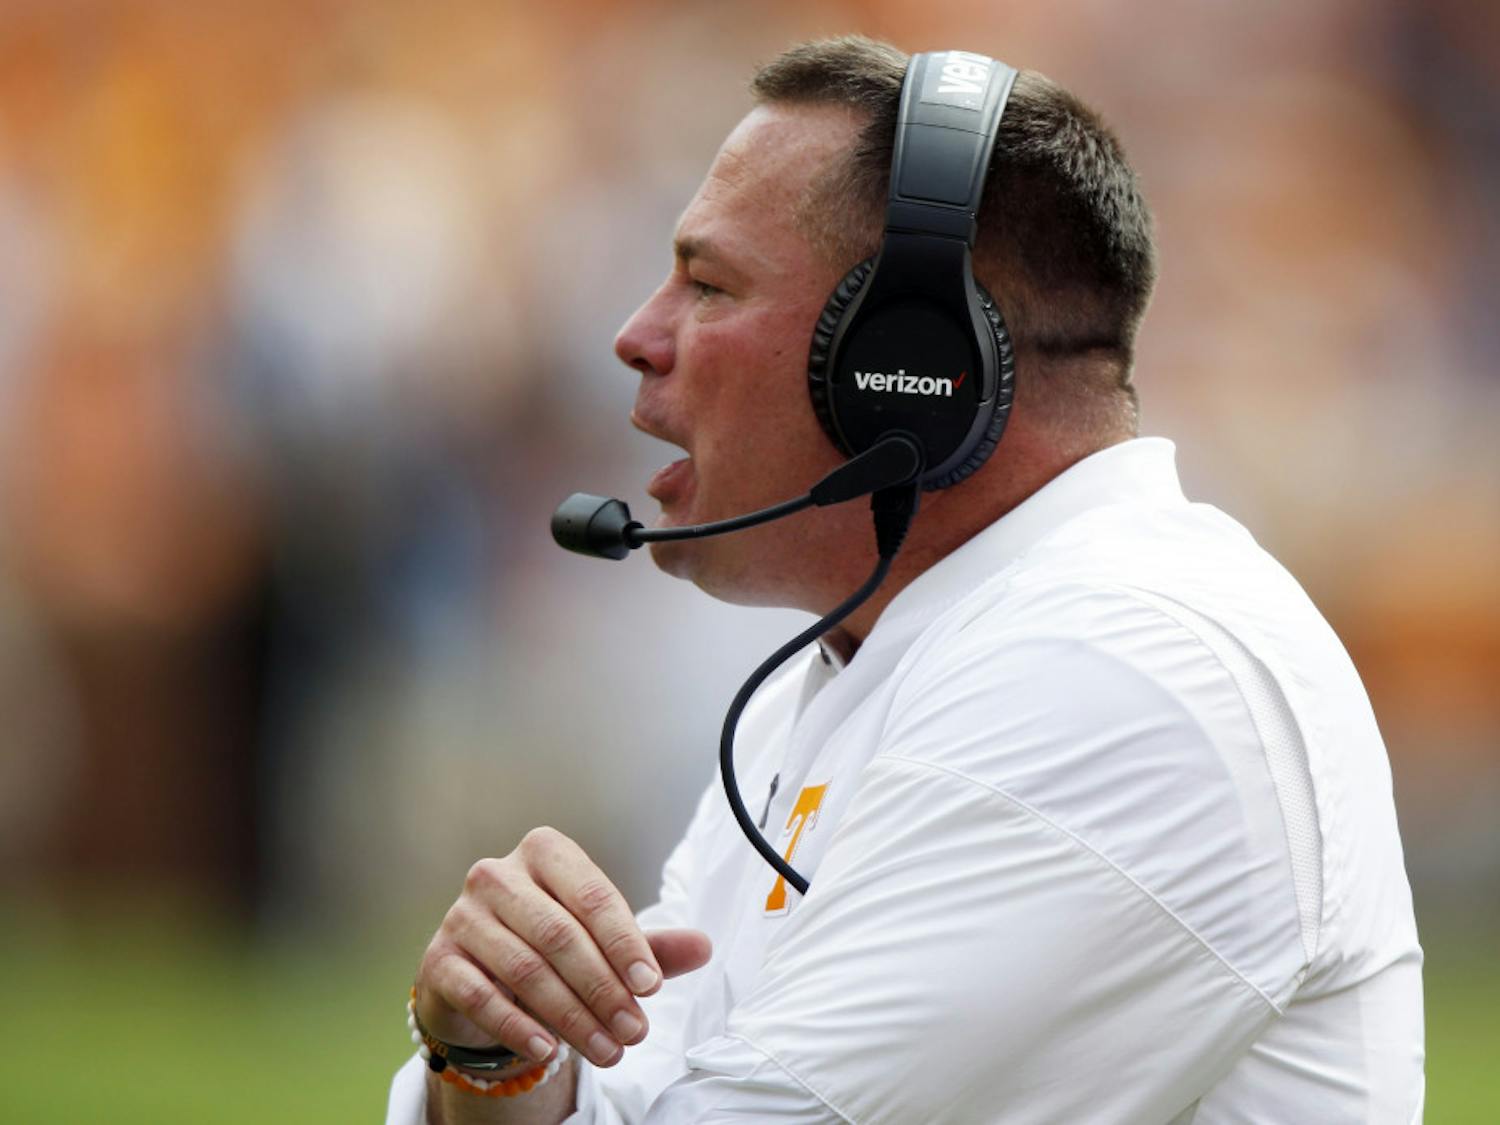 Tennessee head coach Butch Jones yells to a players in the first half of an NCAA college football game against South Carolina, Saturday, Oct. 14, 2017, in Knoxville, Tenn. (AP Photo/Wade Payne)